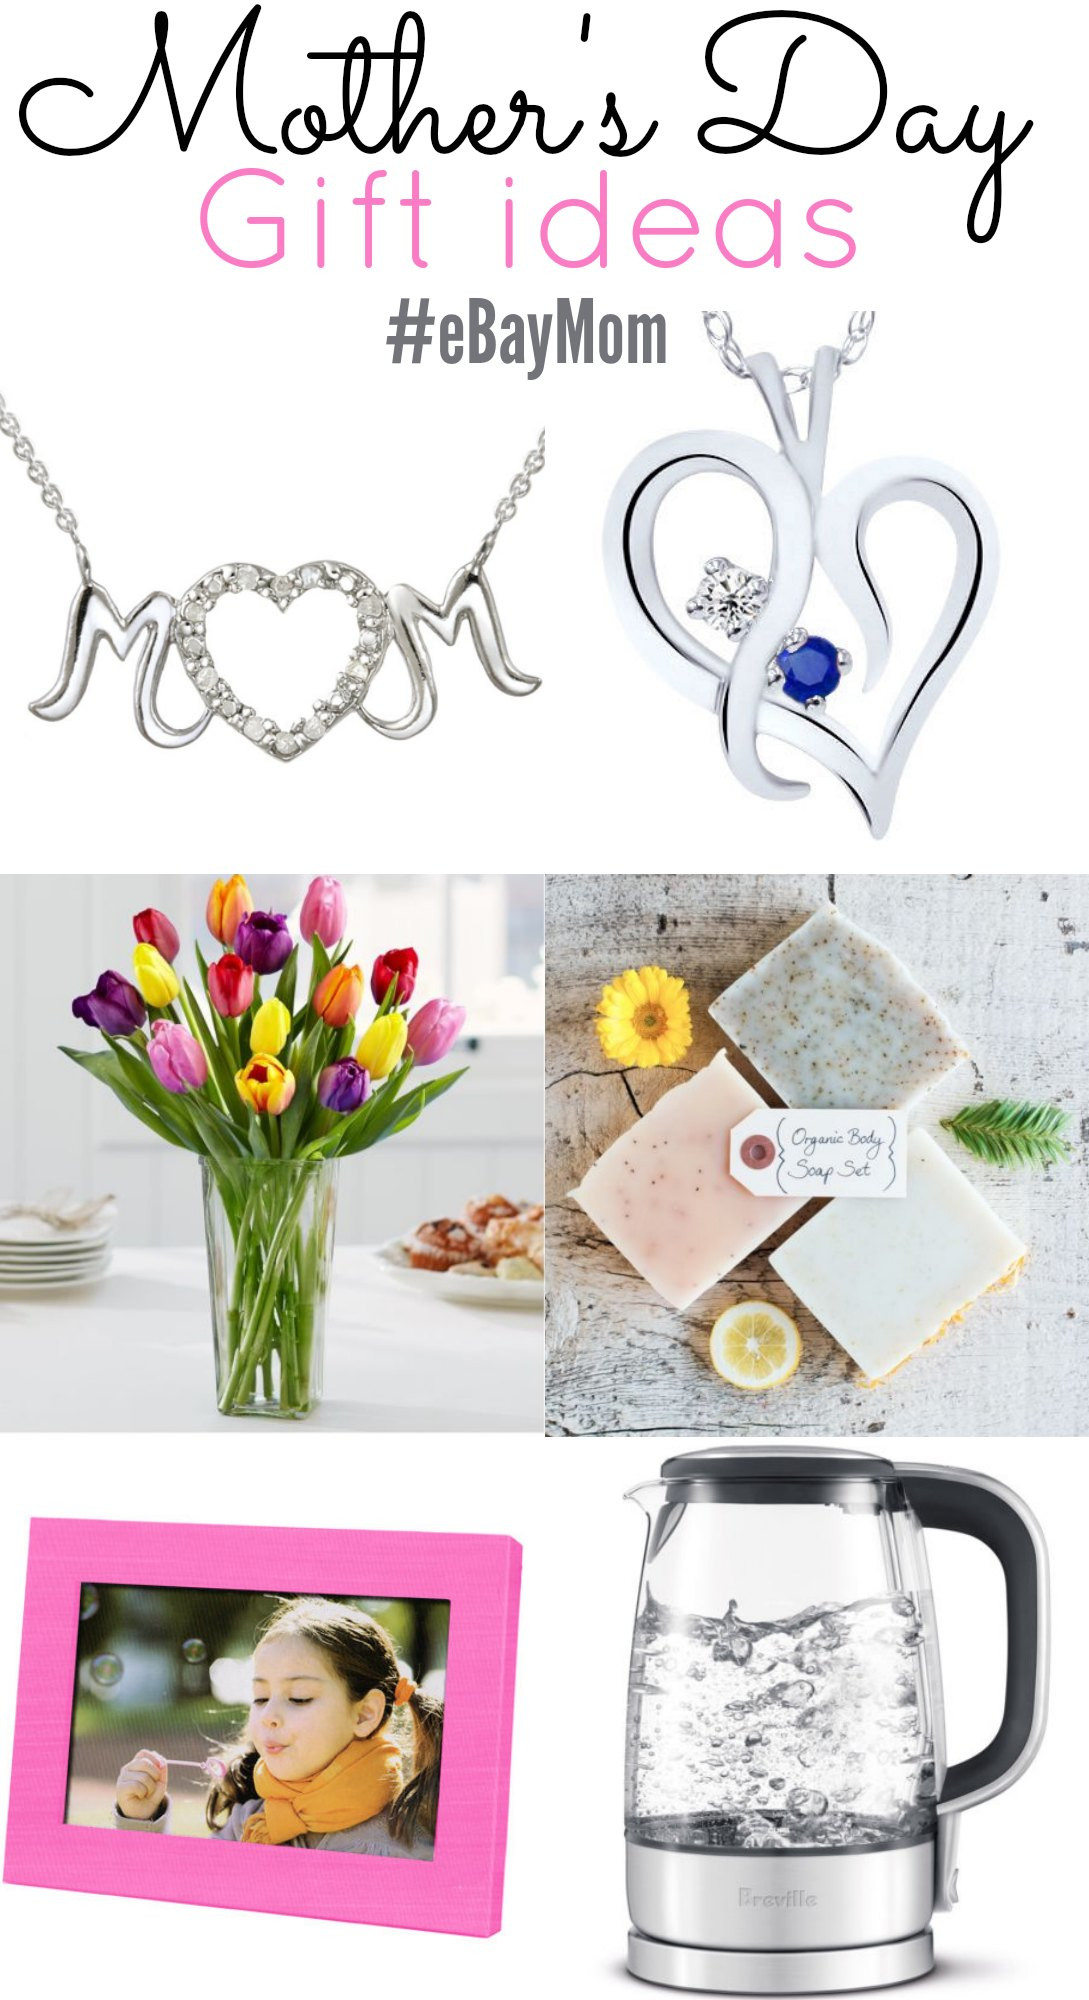 Mother And Son Gift Ideas
 Mother’s Day Gift Ideas & Sweepstakes eBayMom ad